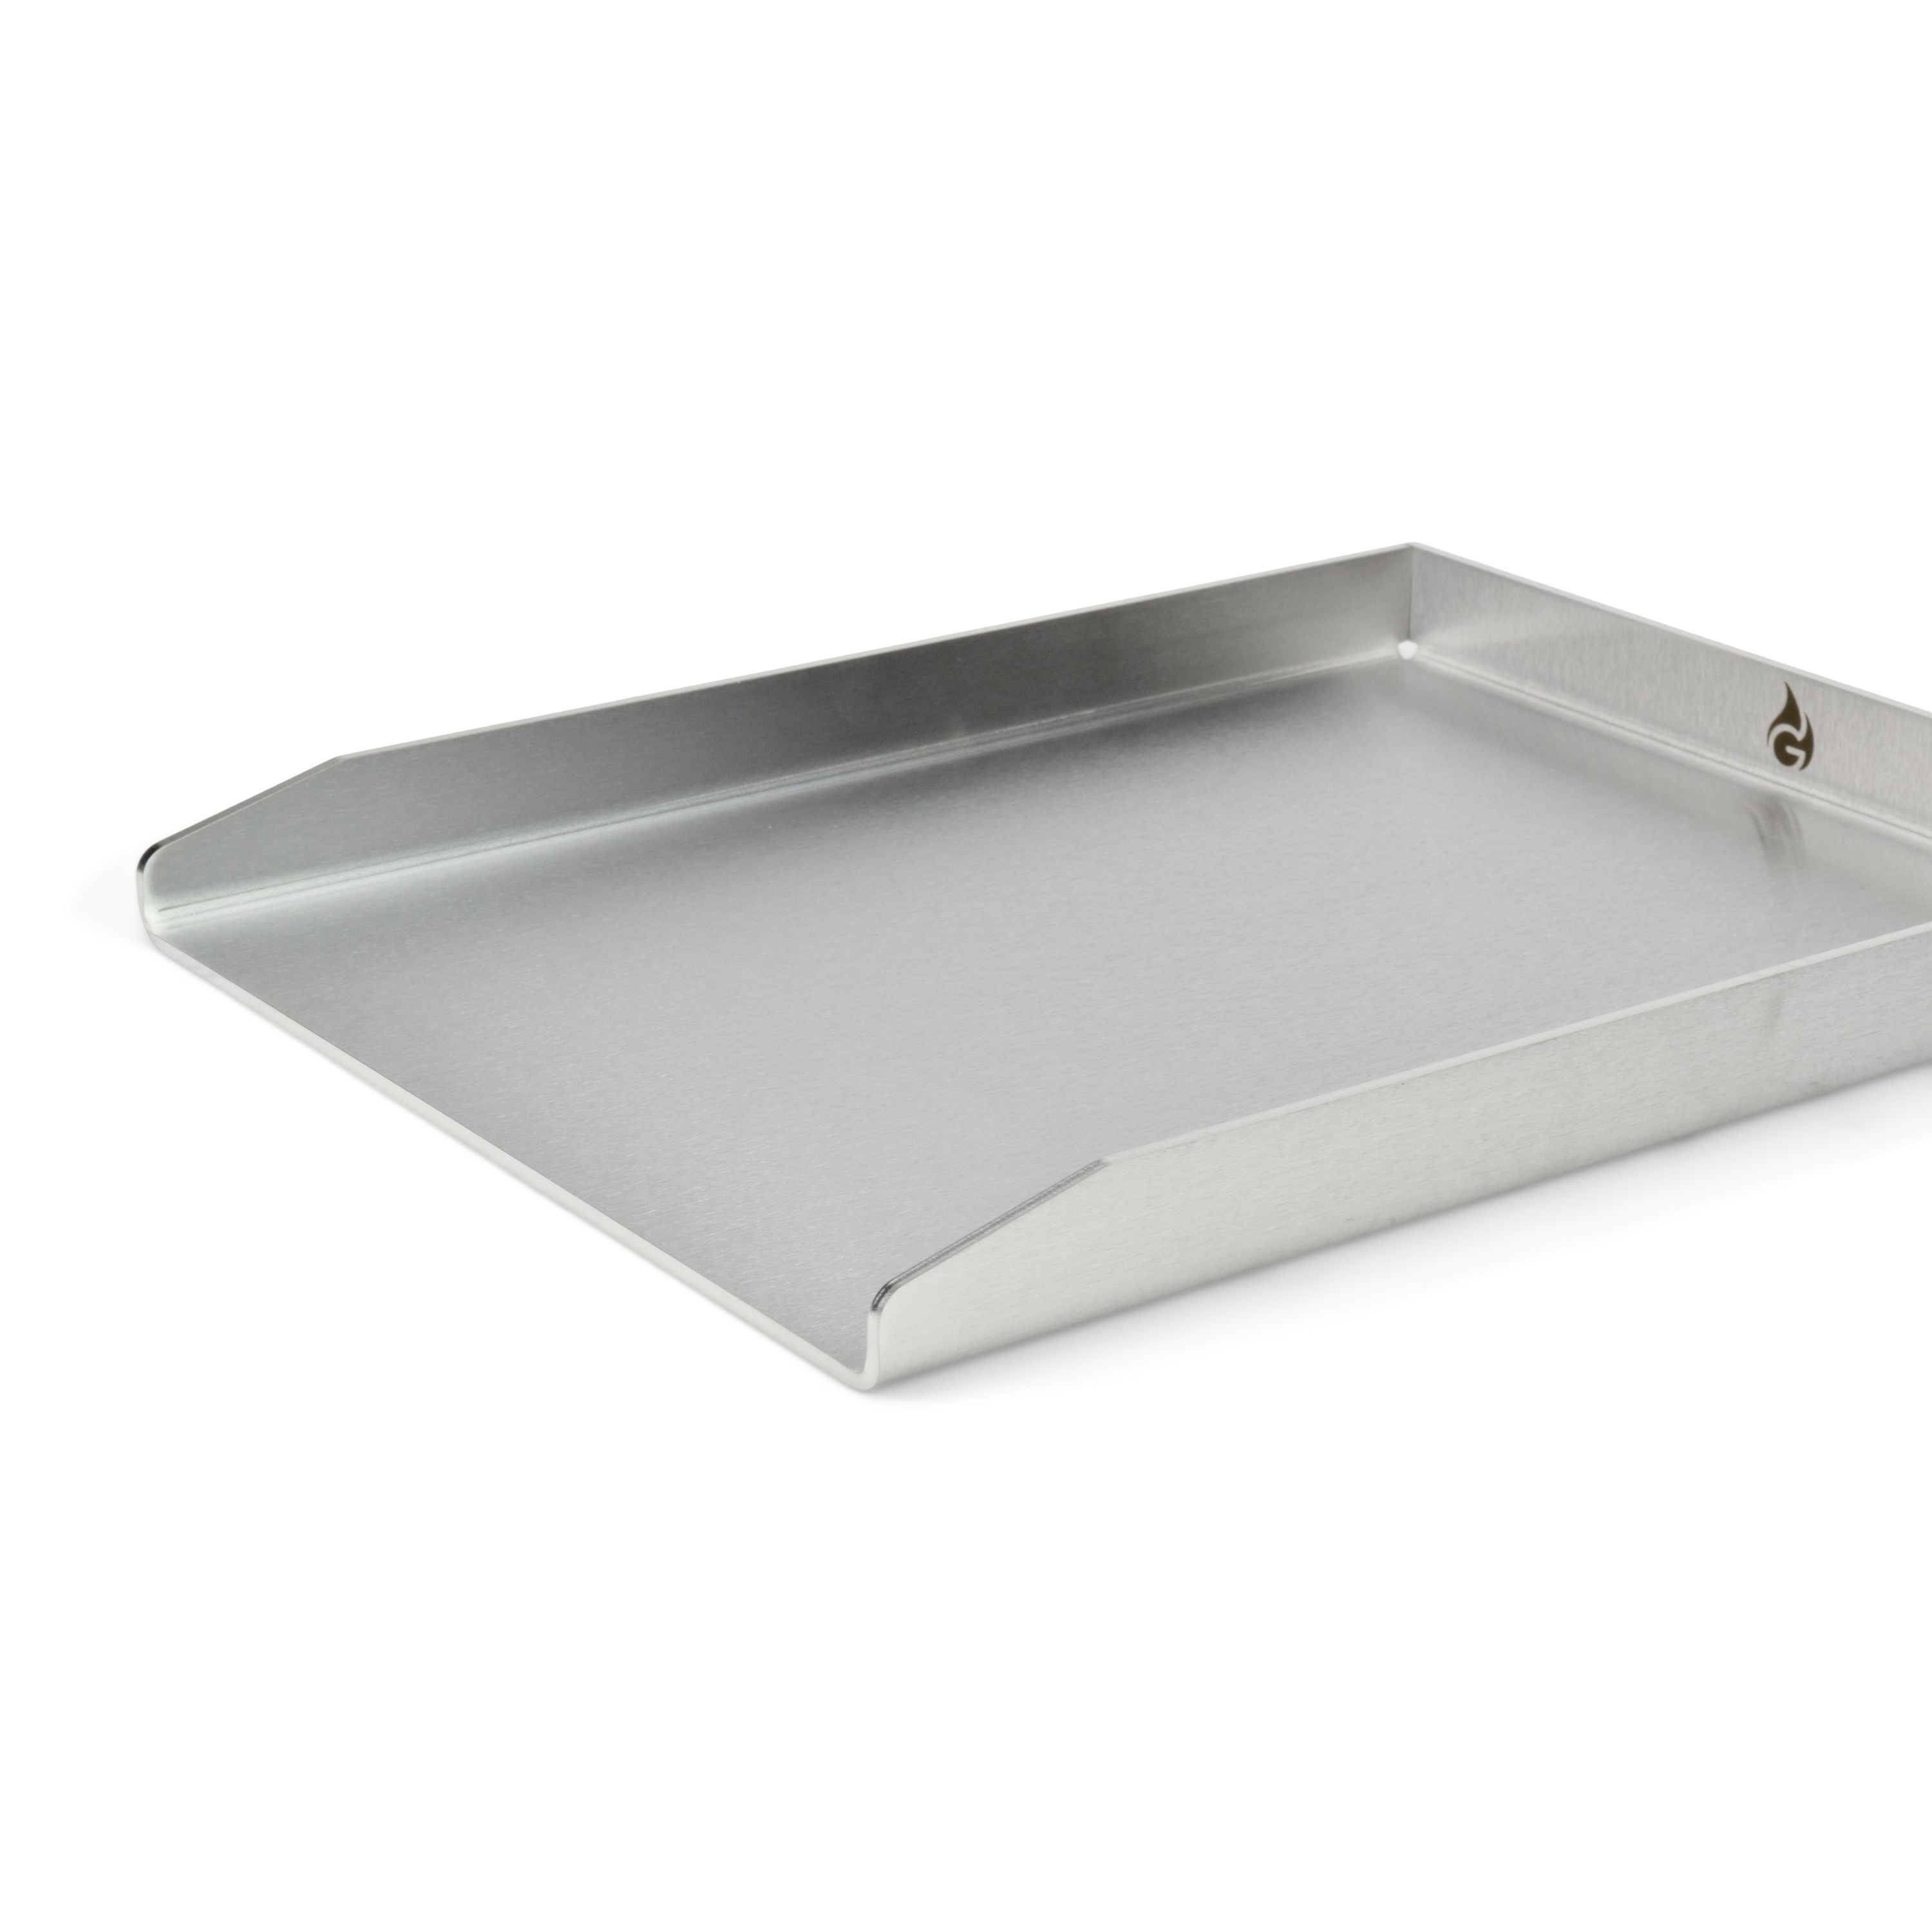 Stainless Steel Grill Plate - Plancha 30 x 40cm the universal size fits many grills